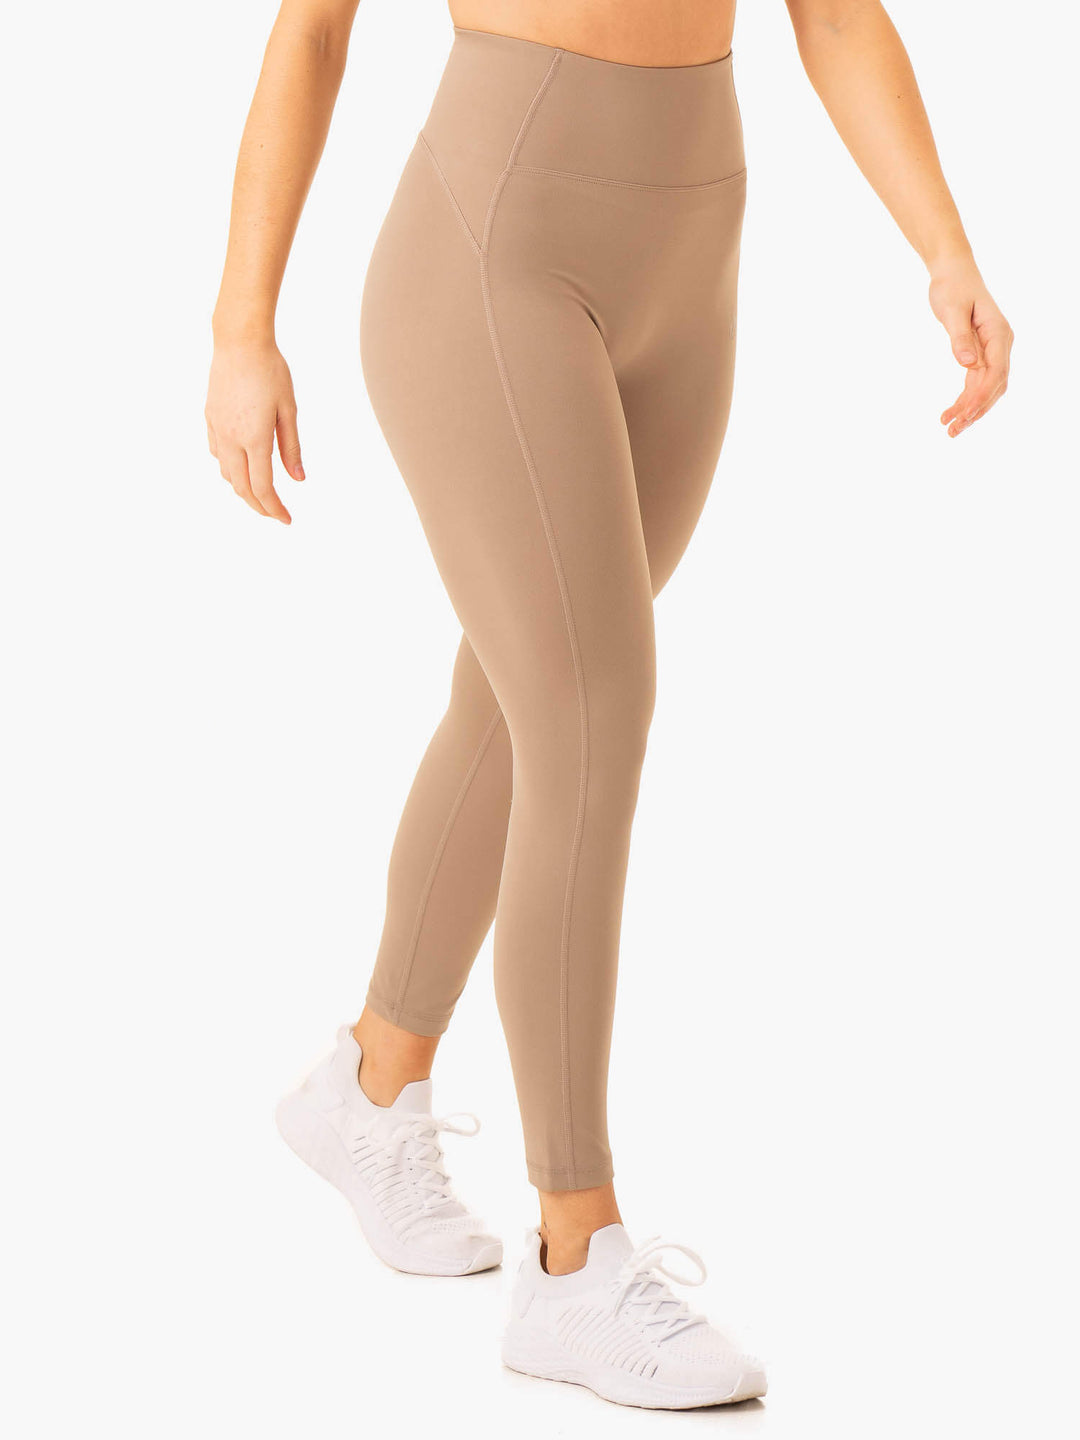 Extend Compression Leggings - Chocolate - Ryderwear